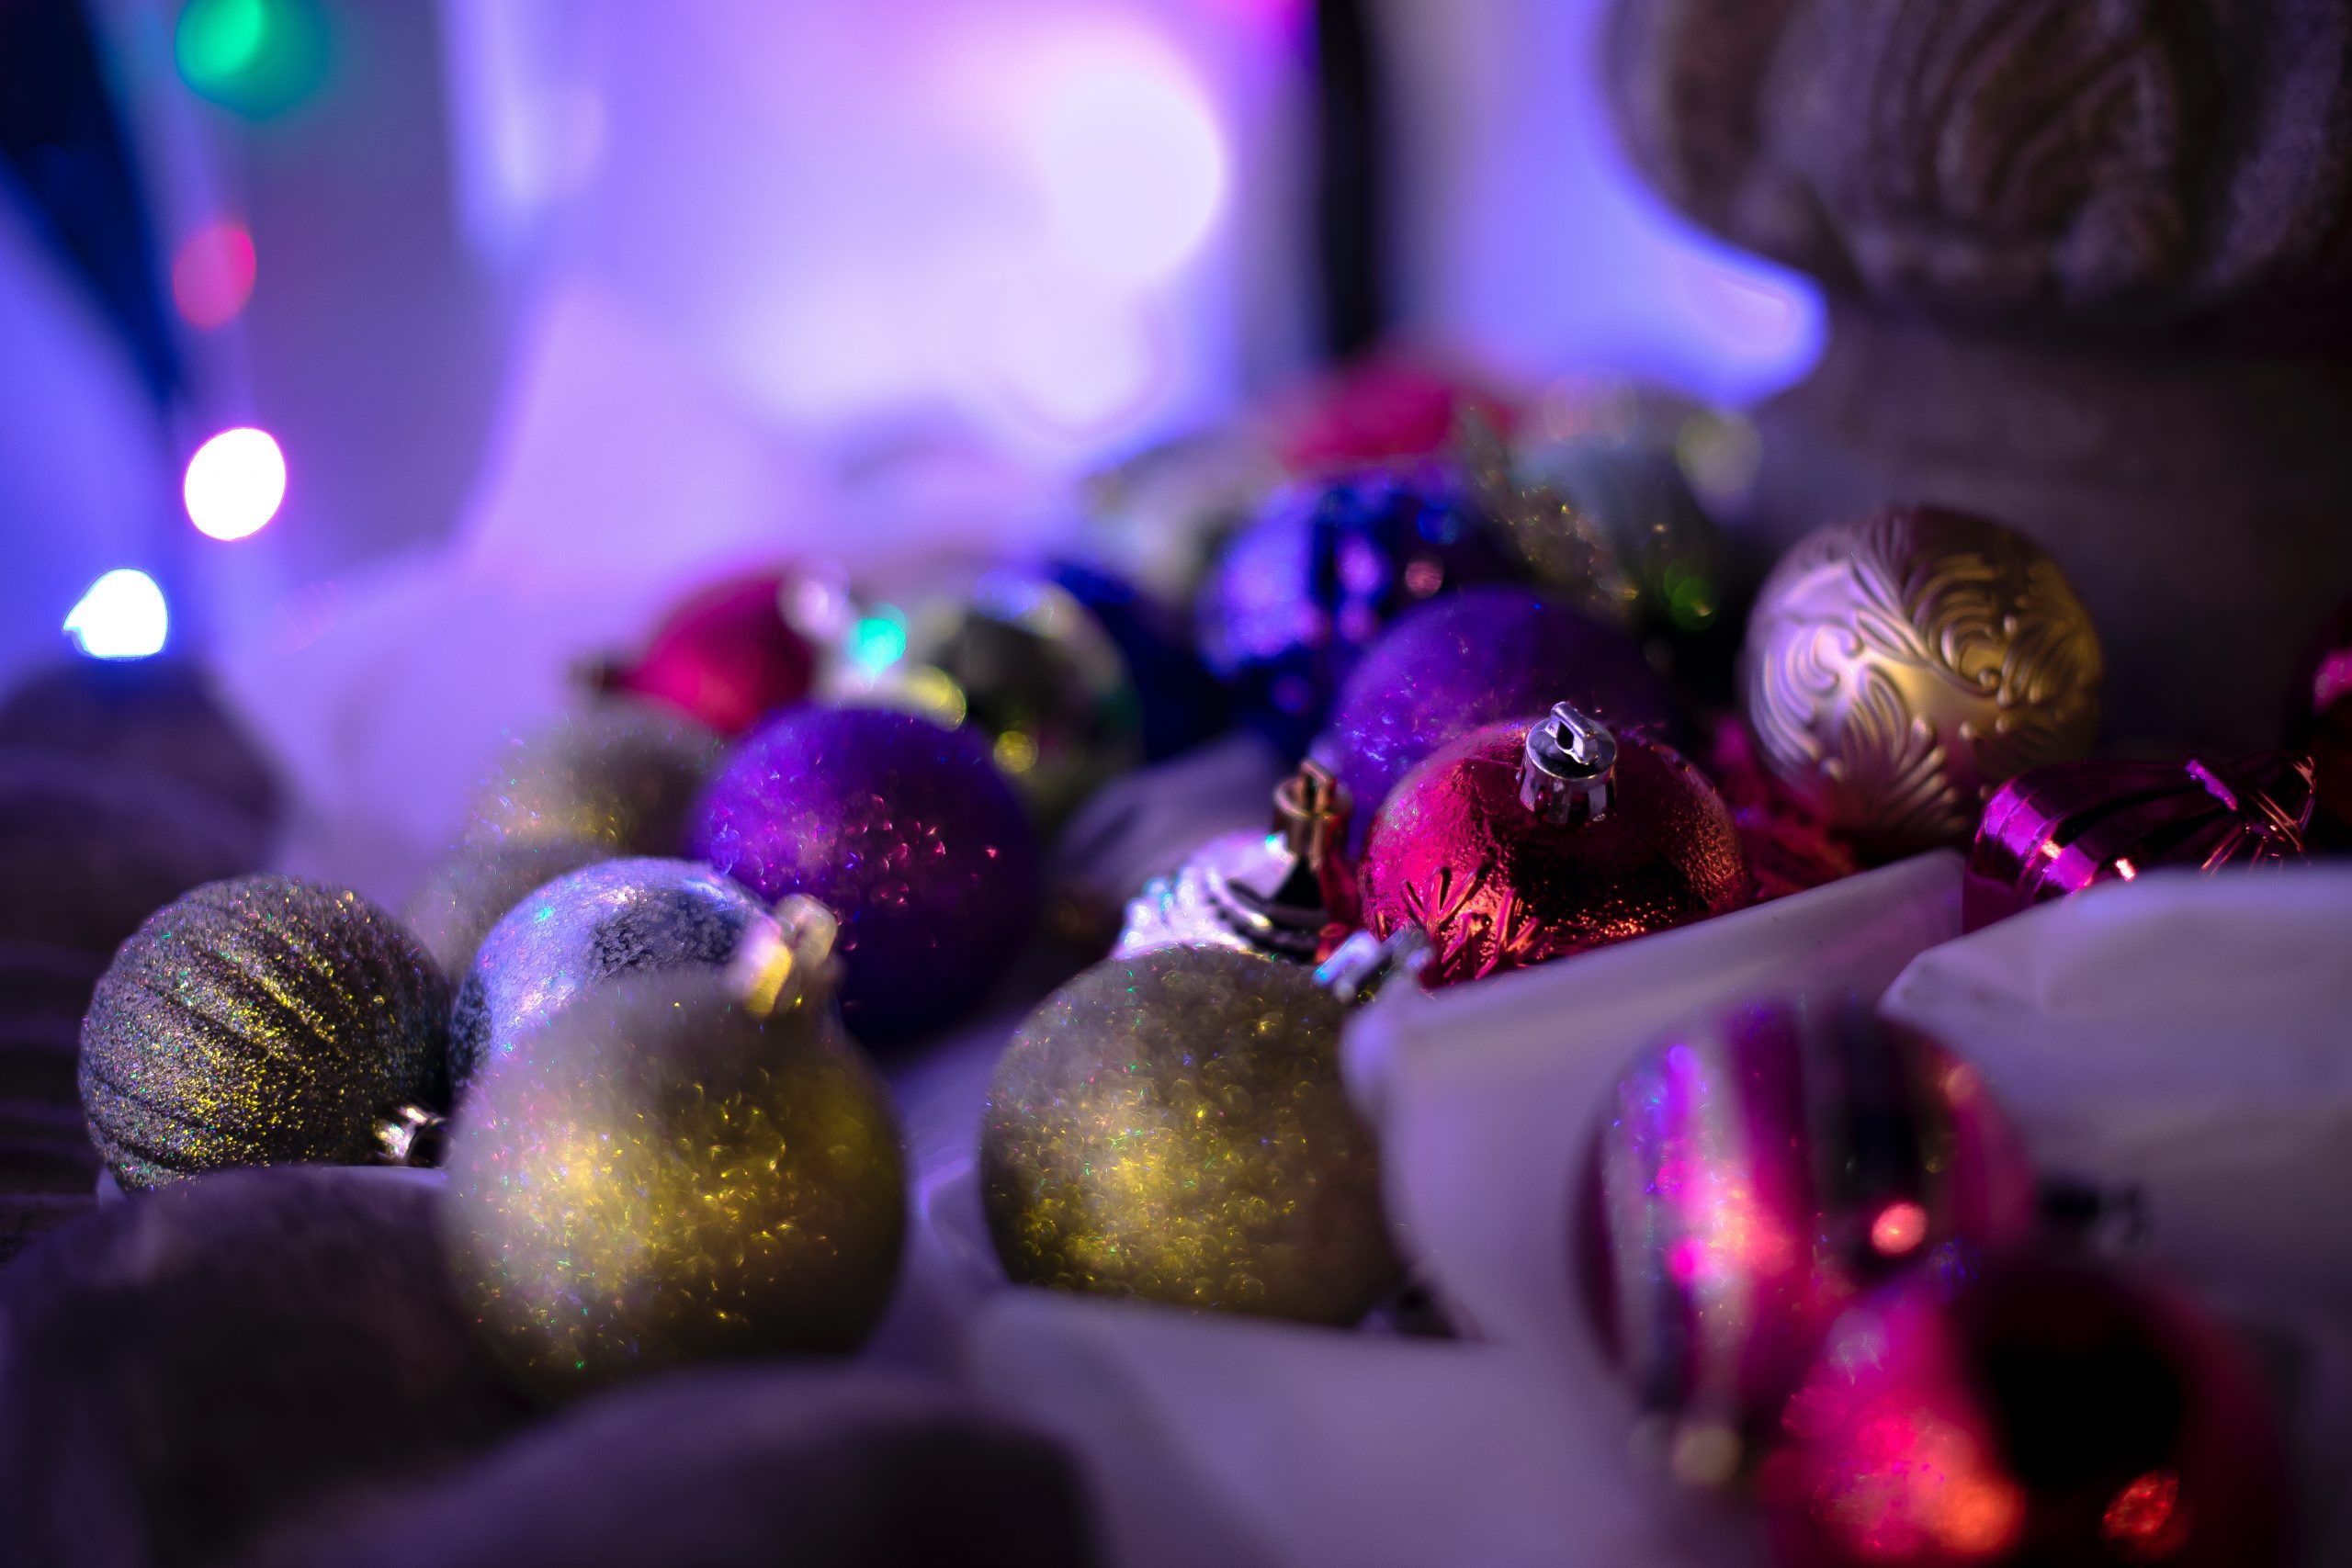 Close-up of glittery Christmas ornaments in soft focus with lights.